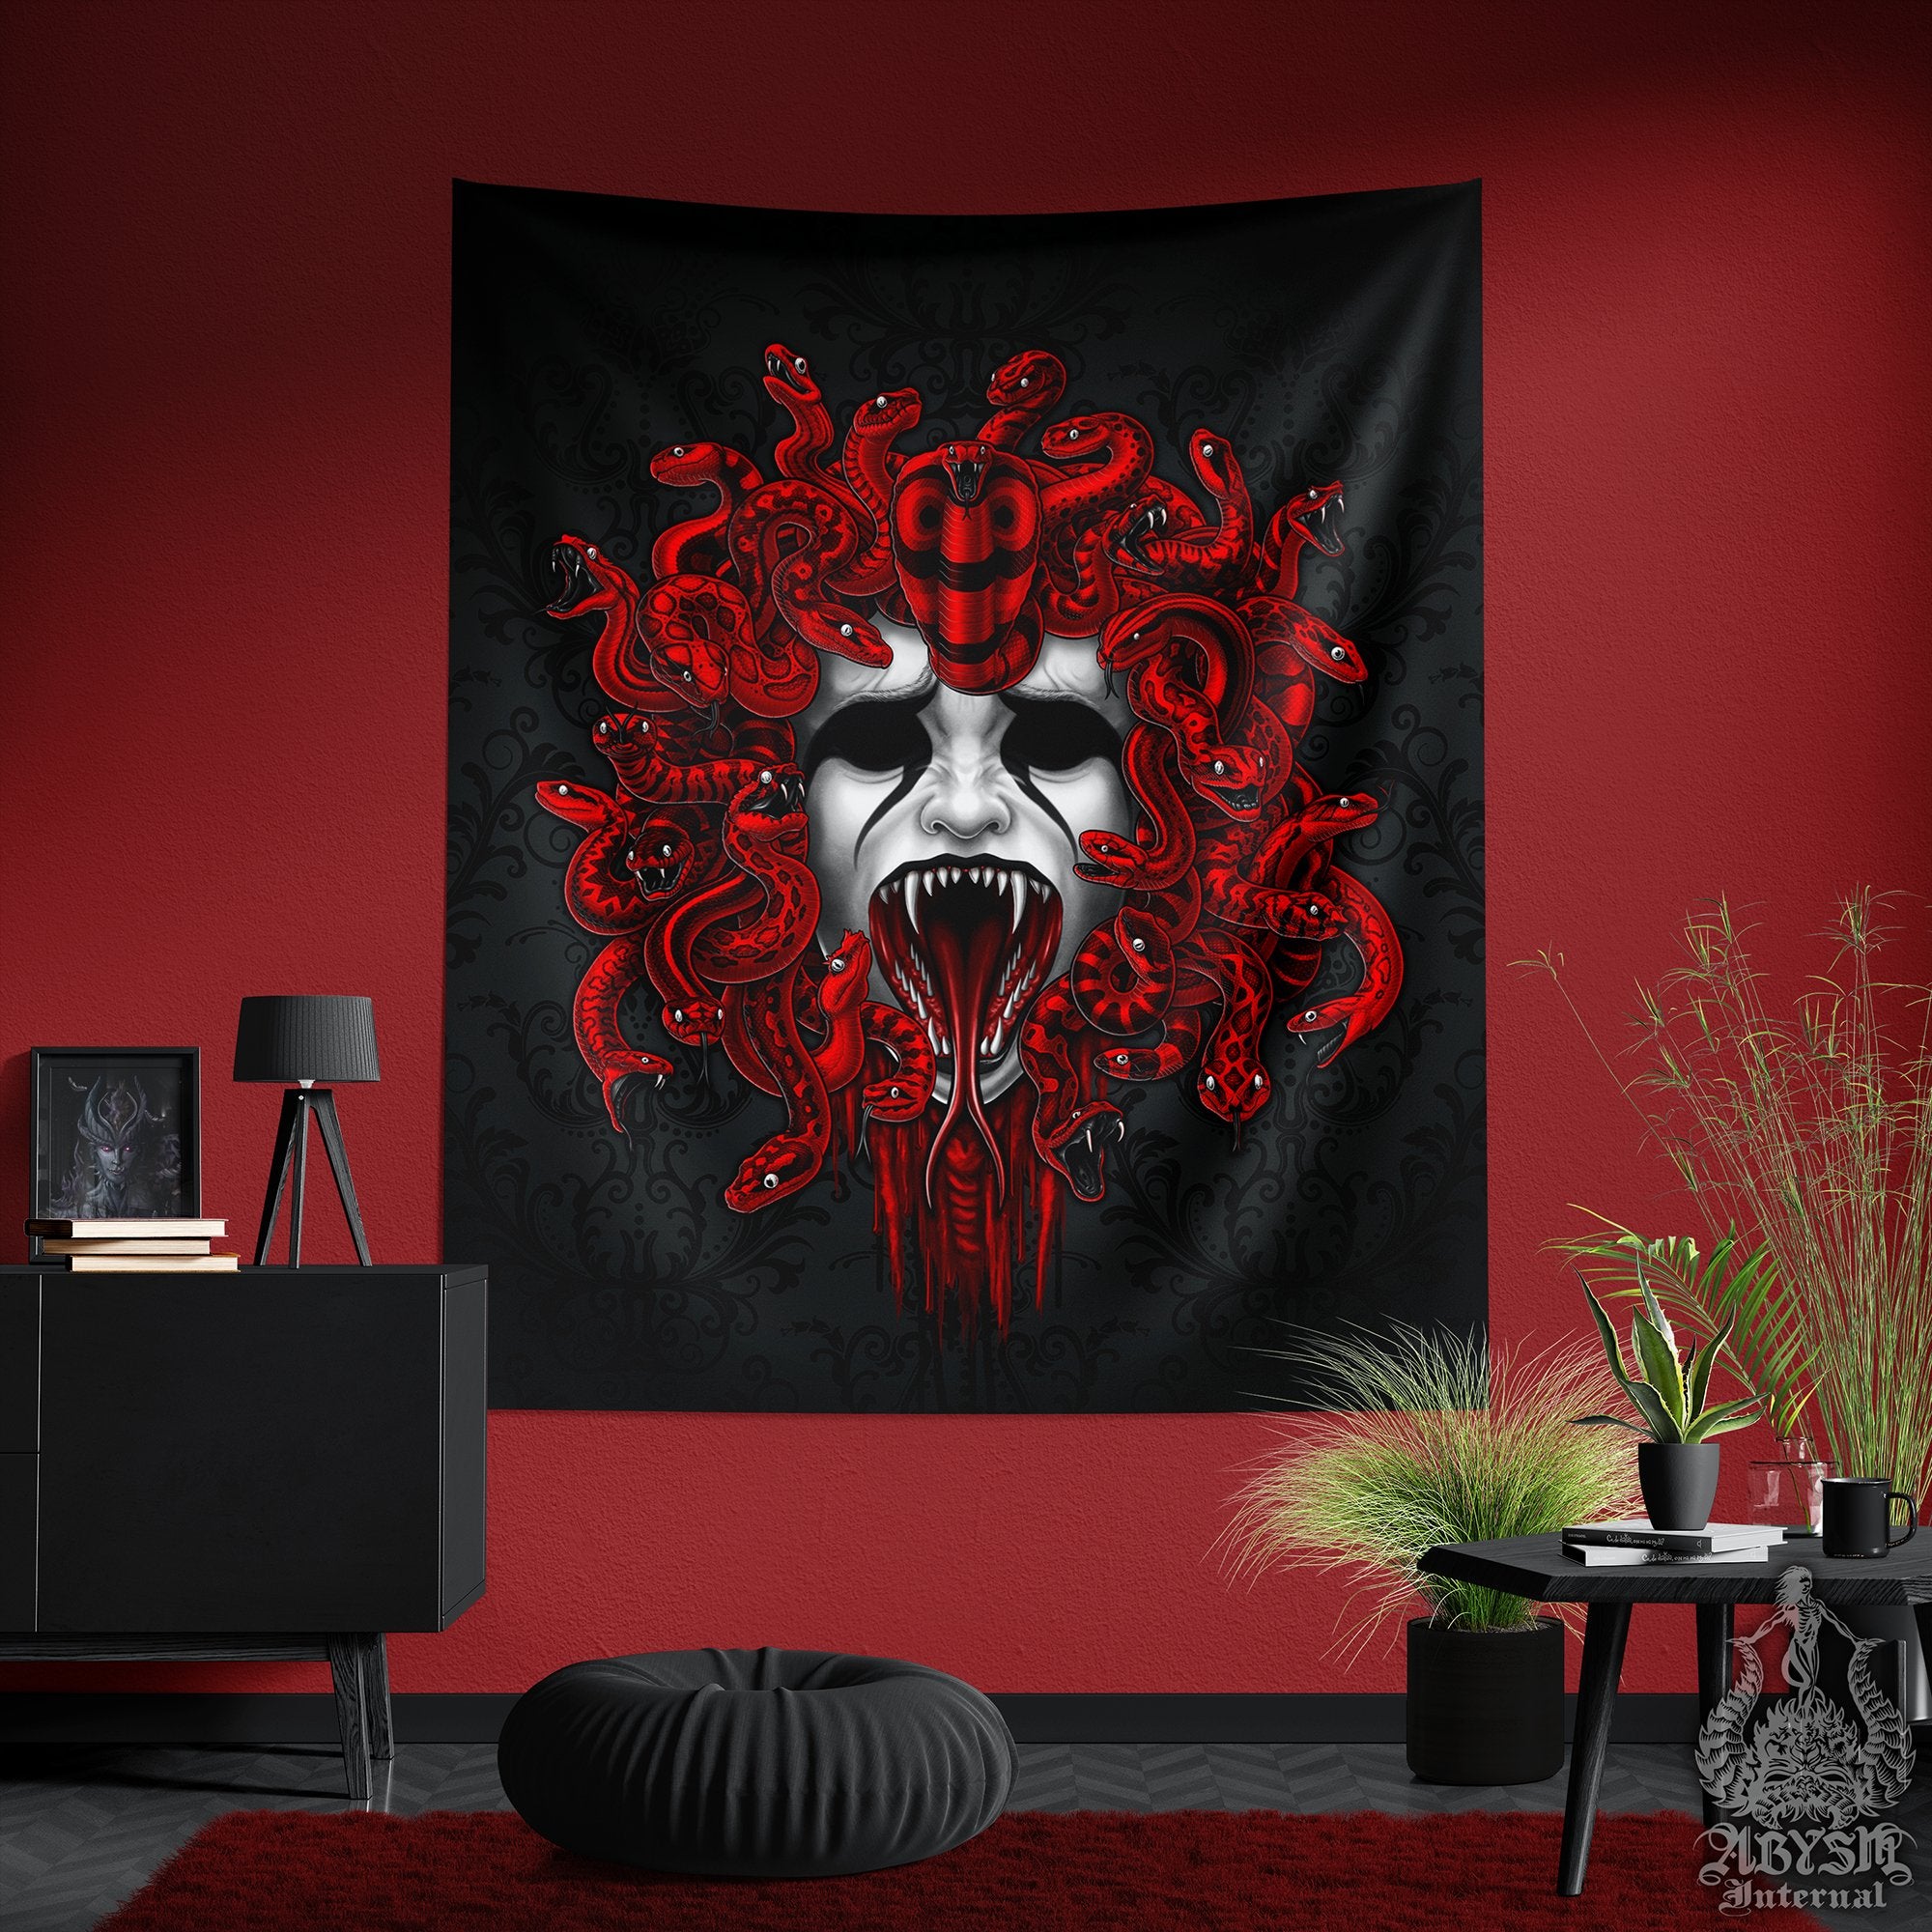 Gothic Tapestry, Medusa & Skull Wall Hanging, Nu Goth Home Decor, Vertical Art Print - 2 Faces, 3 Colors - Abysm Internal